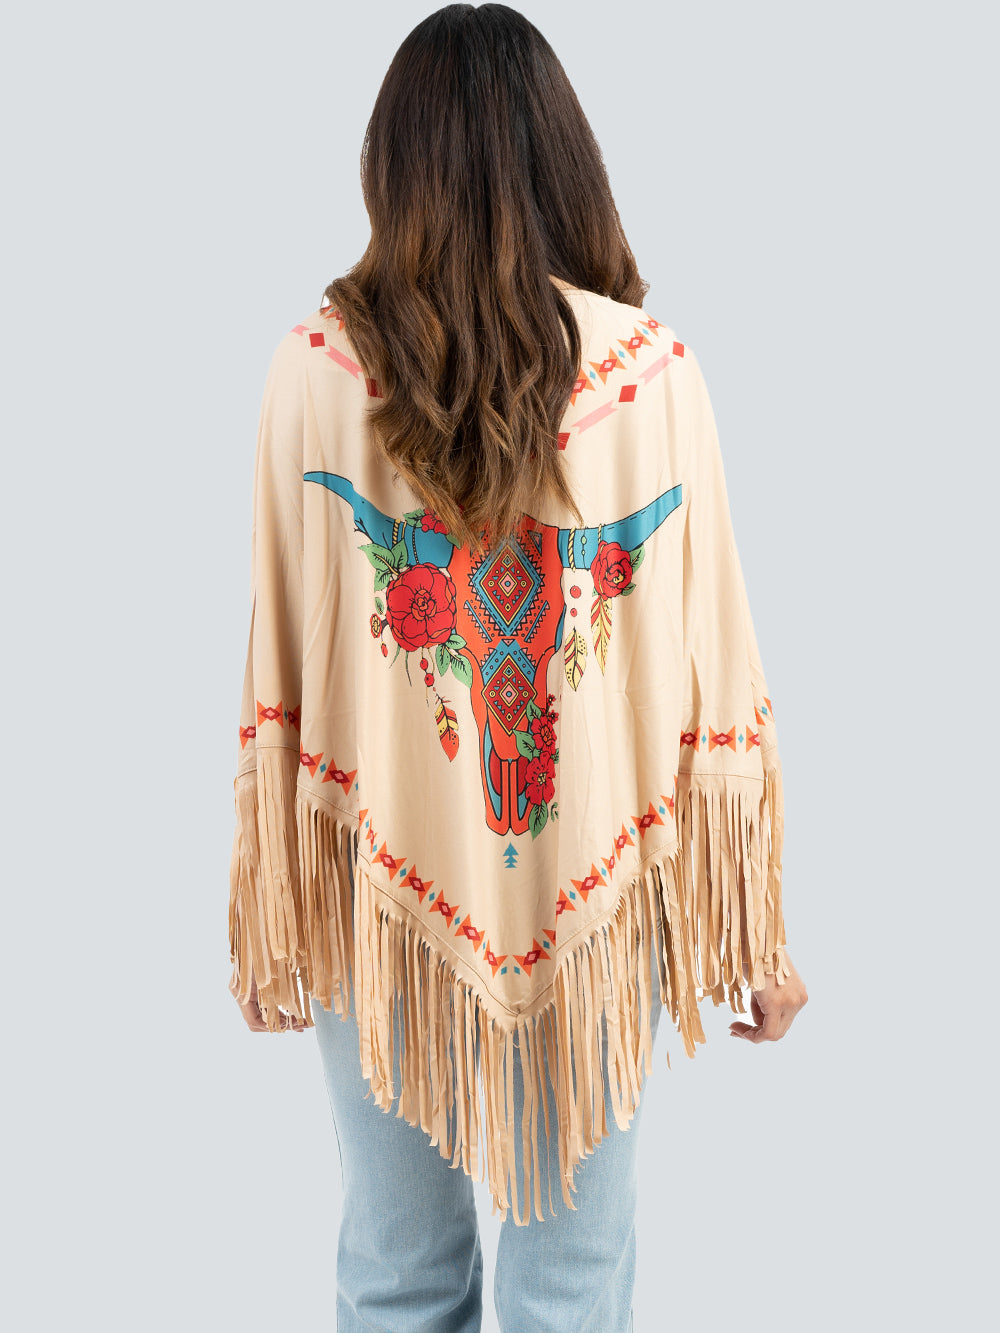 Montana West Steer Skull Collection Poncho - Cowgirl Wear